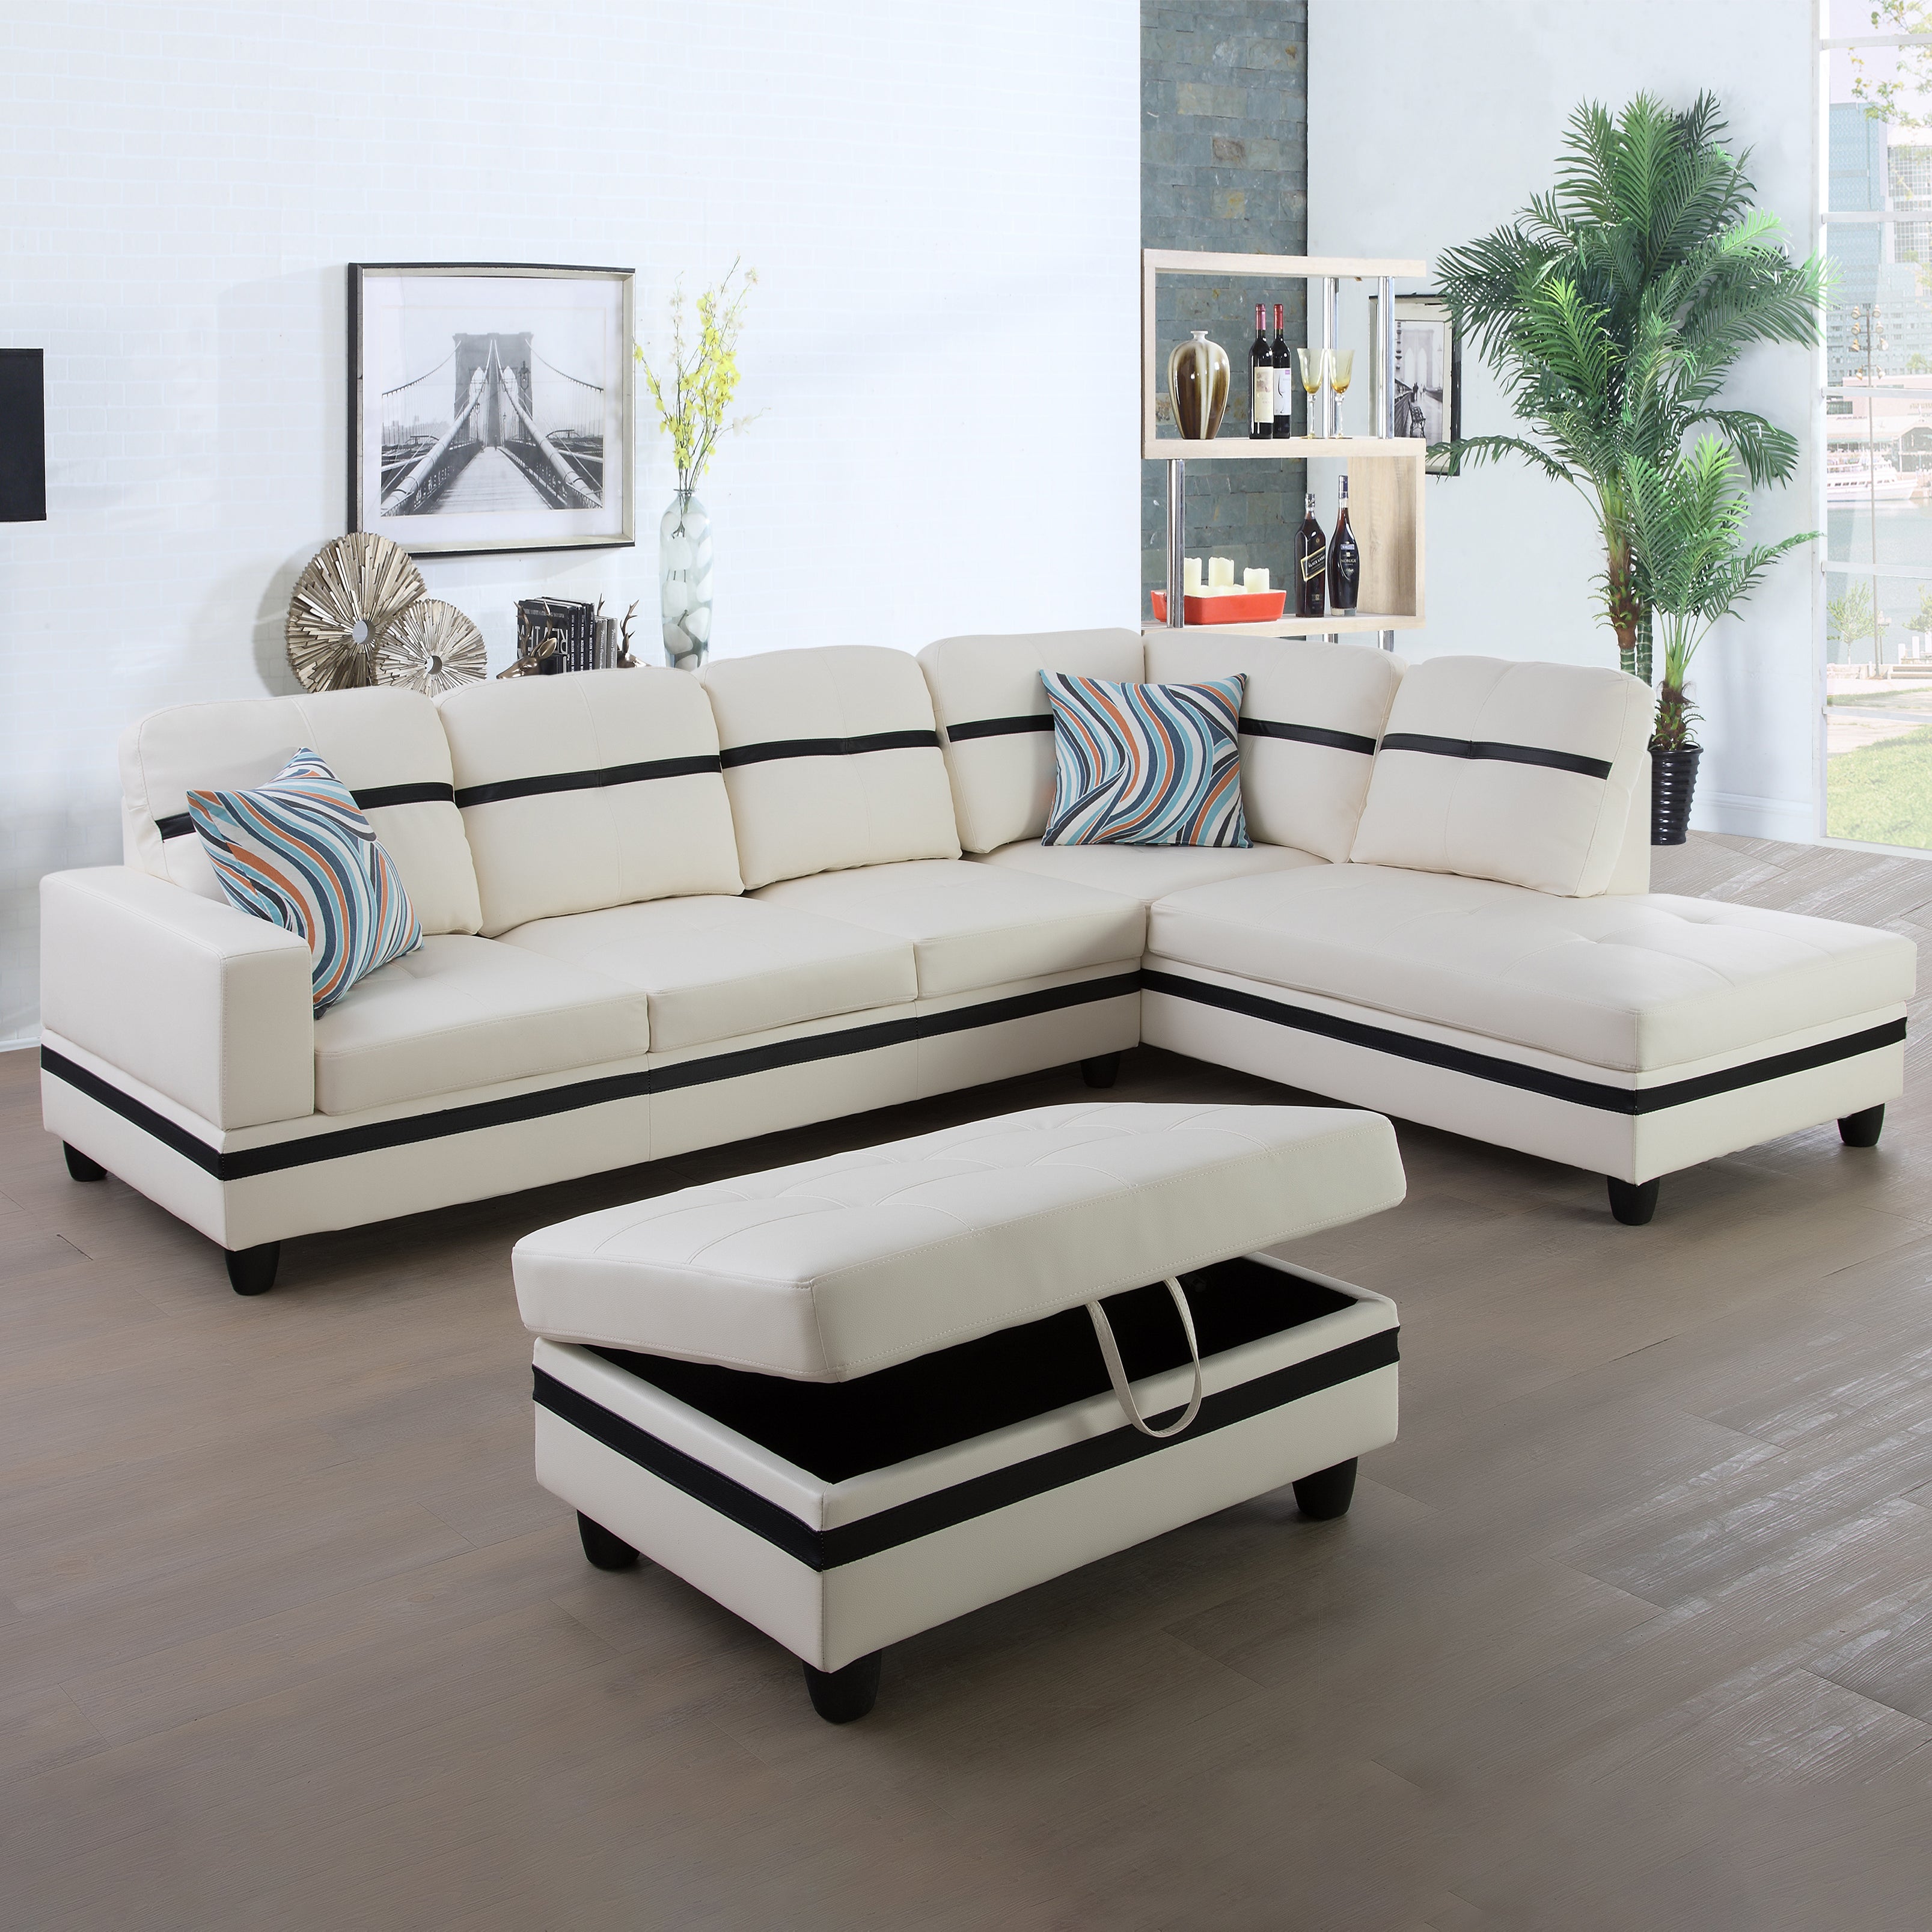 Ainehome White And Black Semi Semi PU Synthetic Leather 3-Piece Couch Living Room Sofa Set